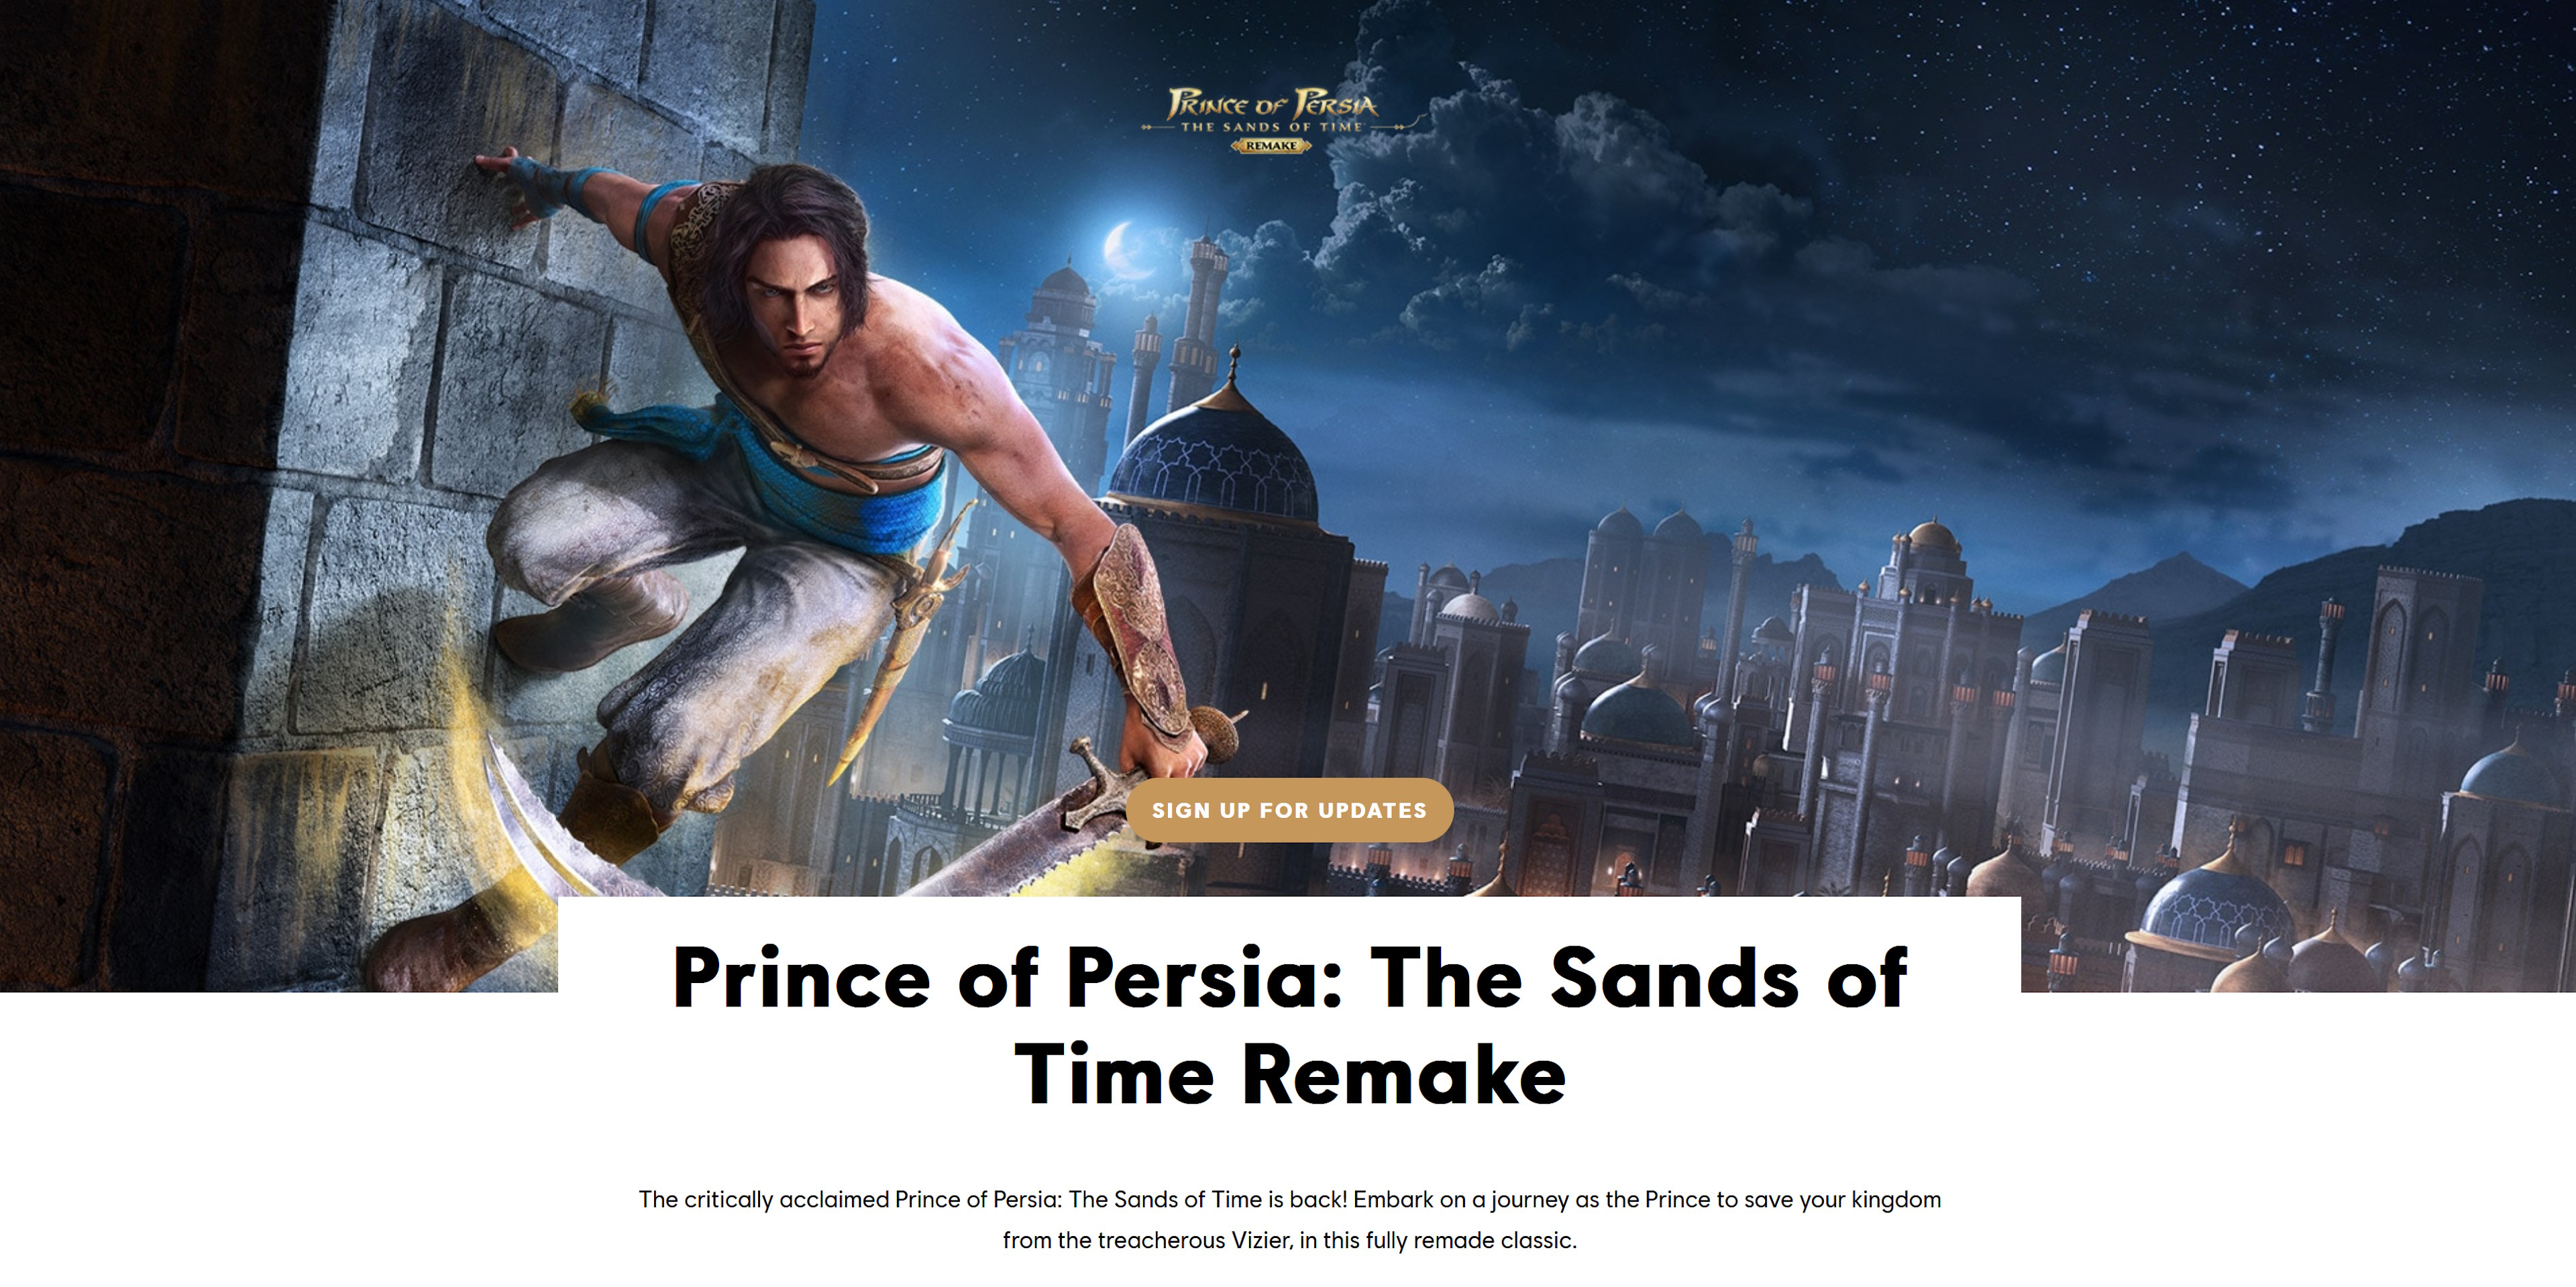 Prince of Persia: The Sands of Time Remake website pre June 10 2024, showing 